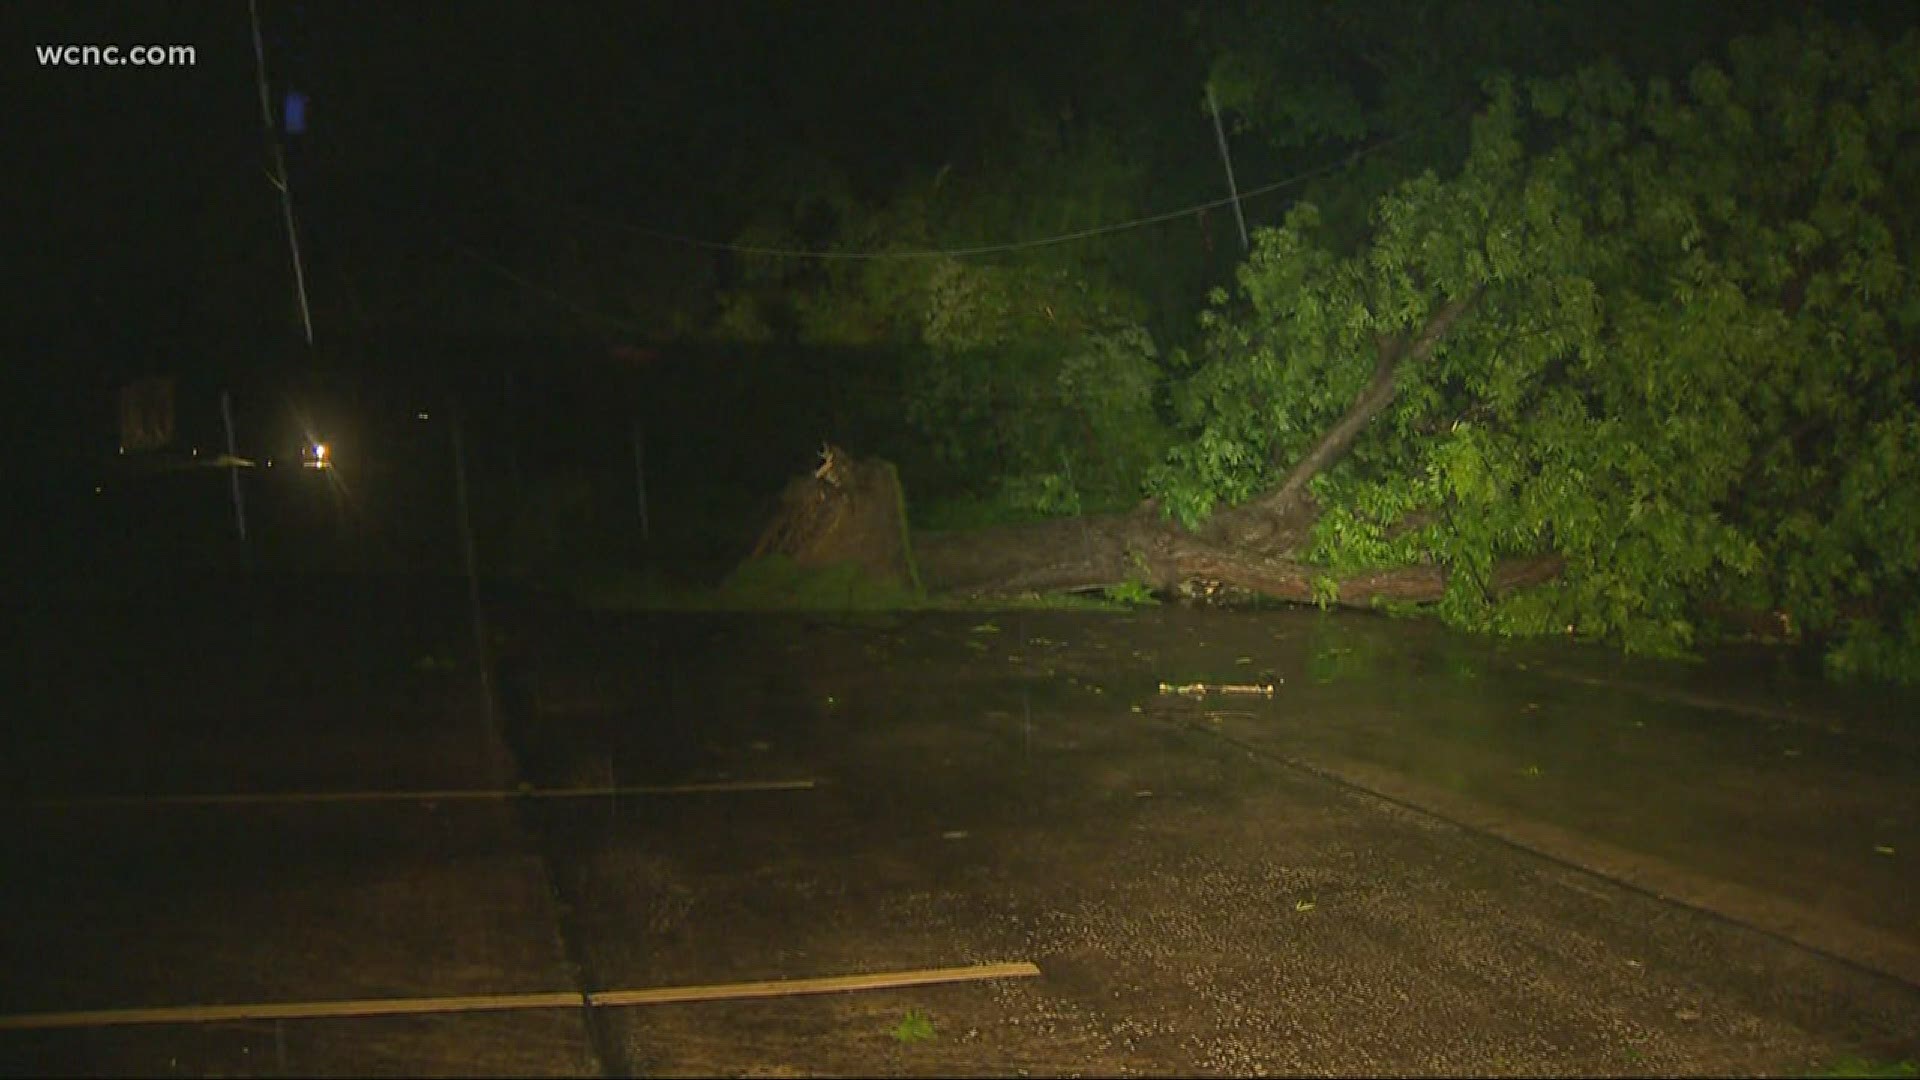 High winds, lightning and large hail brought plenty of damage during severe weather in the Carolinas Tuesday night.